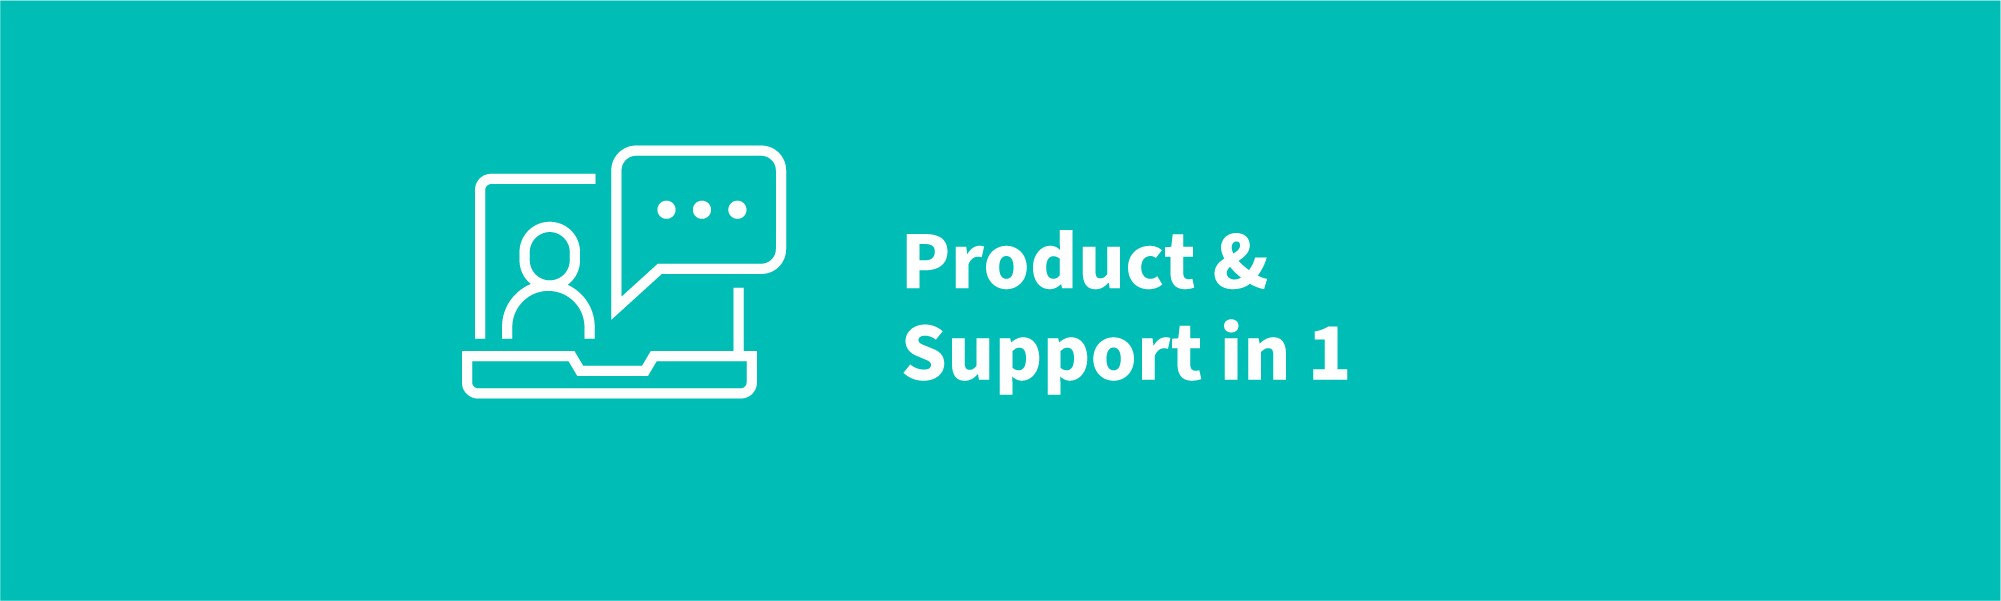 product+supportin1